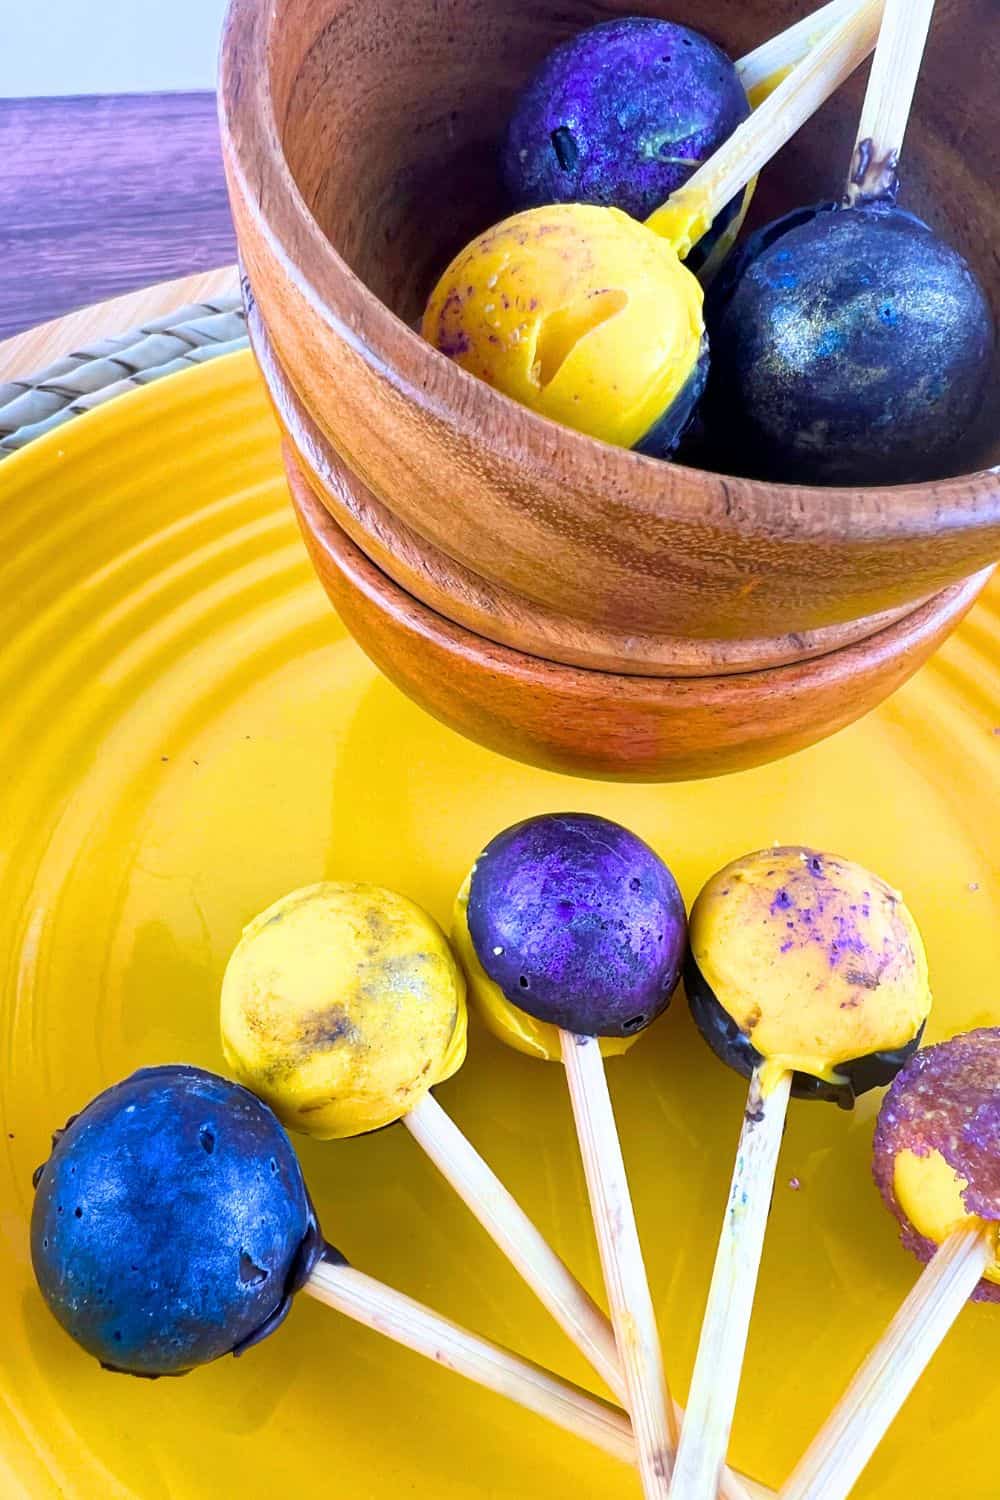 How To Make Chocolate Eclipse Suckers - round chocolate suckers of different galaxy colors on a yellow plate on a table